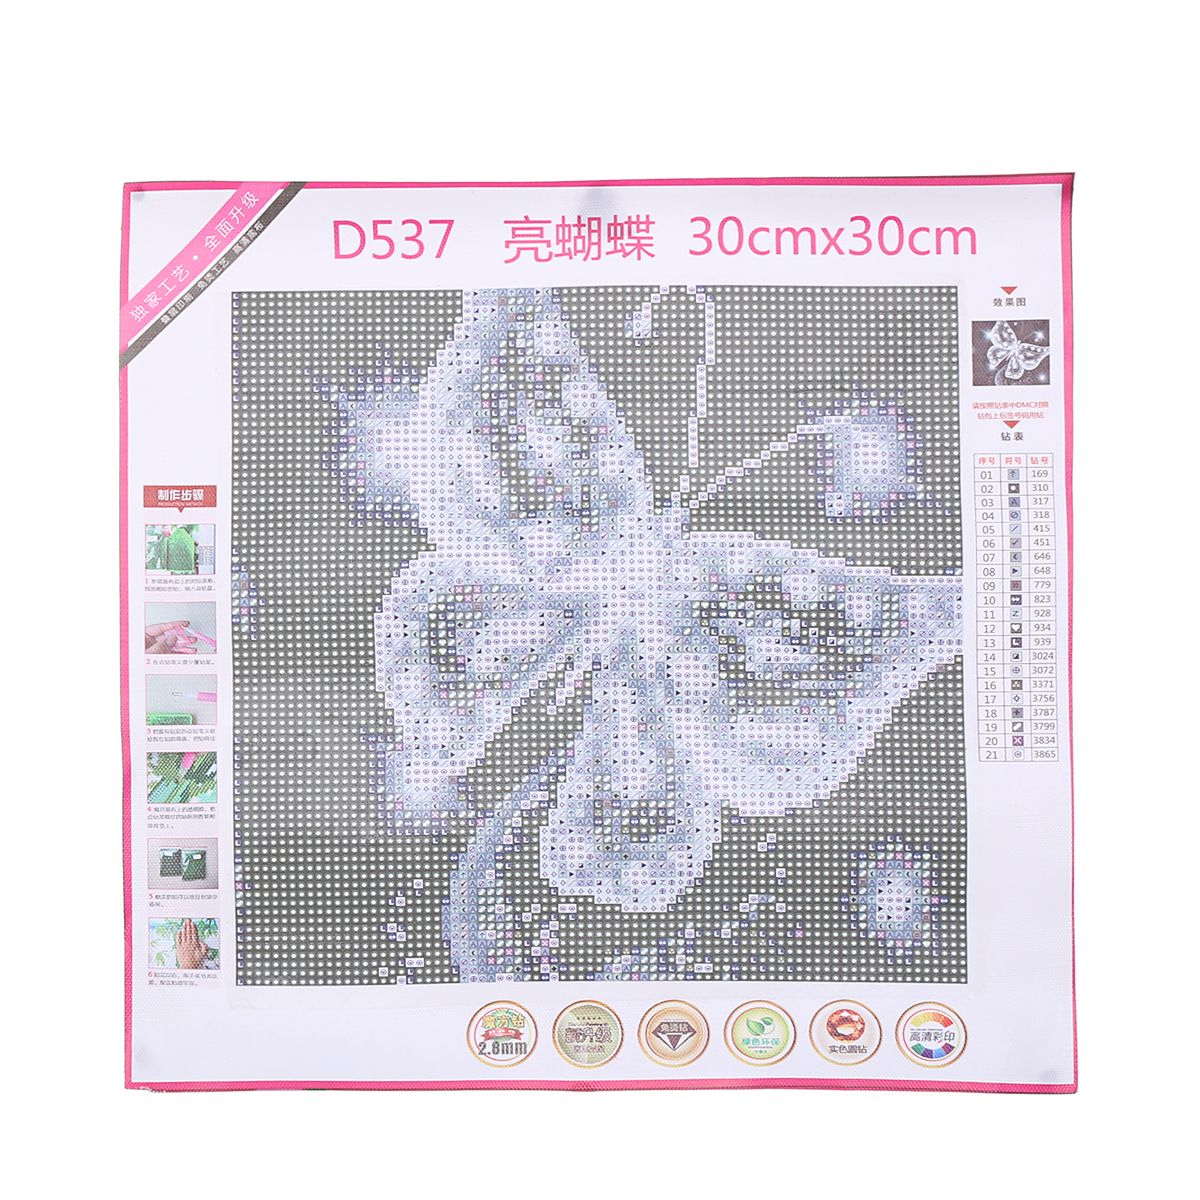 Butterfly-5D-Diamond-Paintings-Embroidery-Cross-Stitch-Tool-Kit-1517978